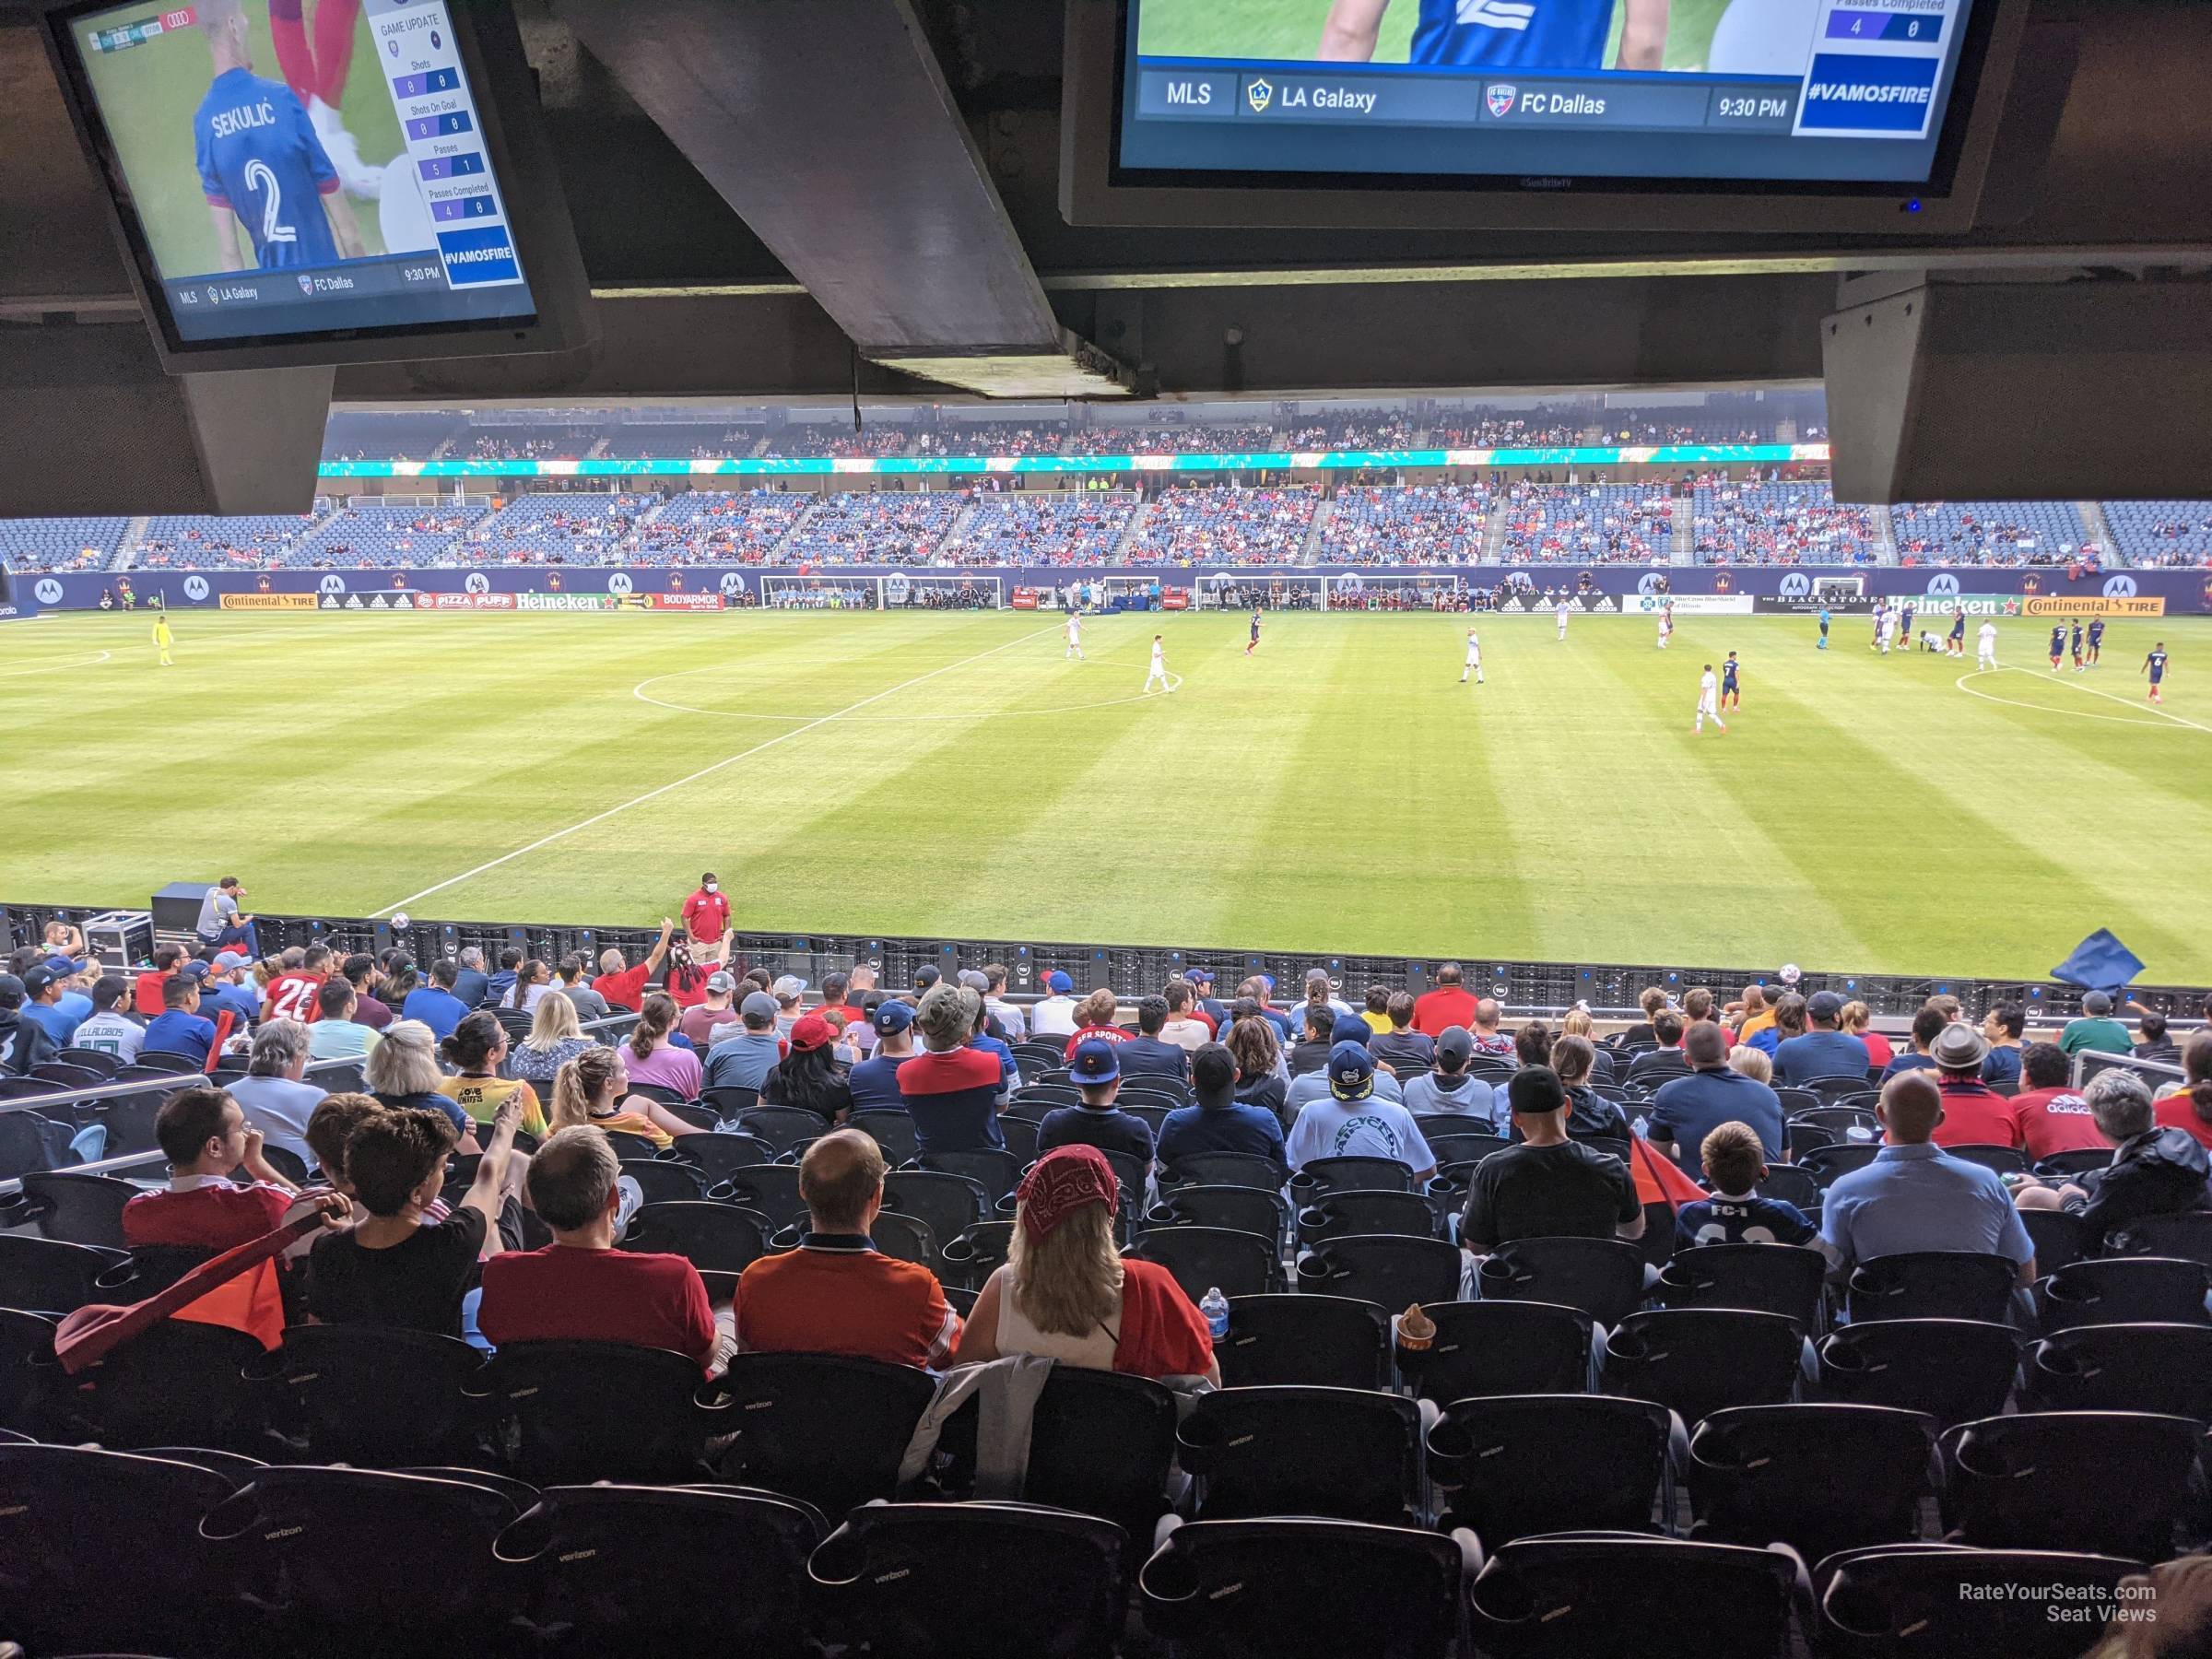 Section 107 at Soldier Field - RateYourSeats.com